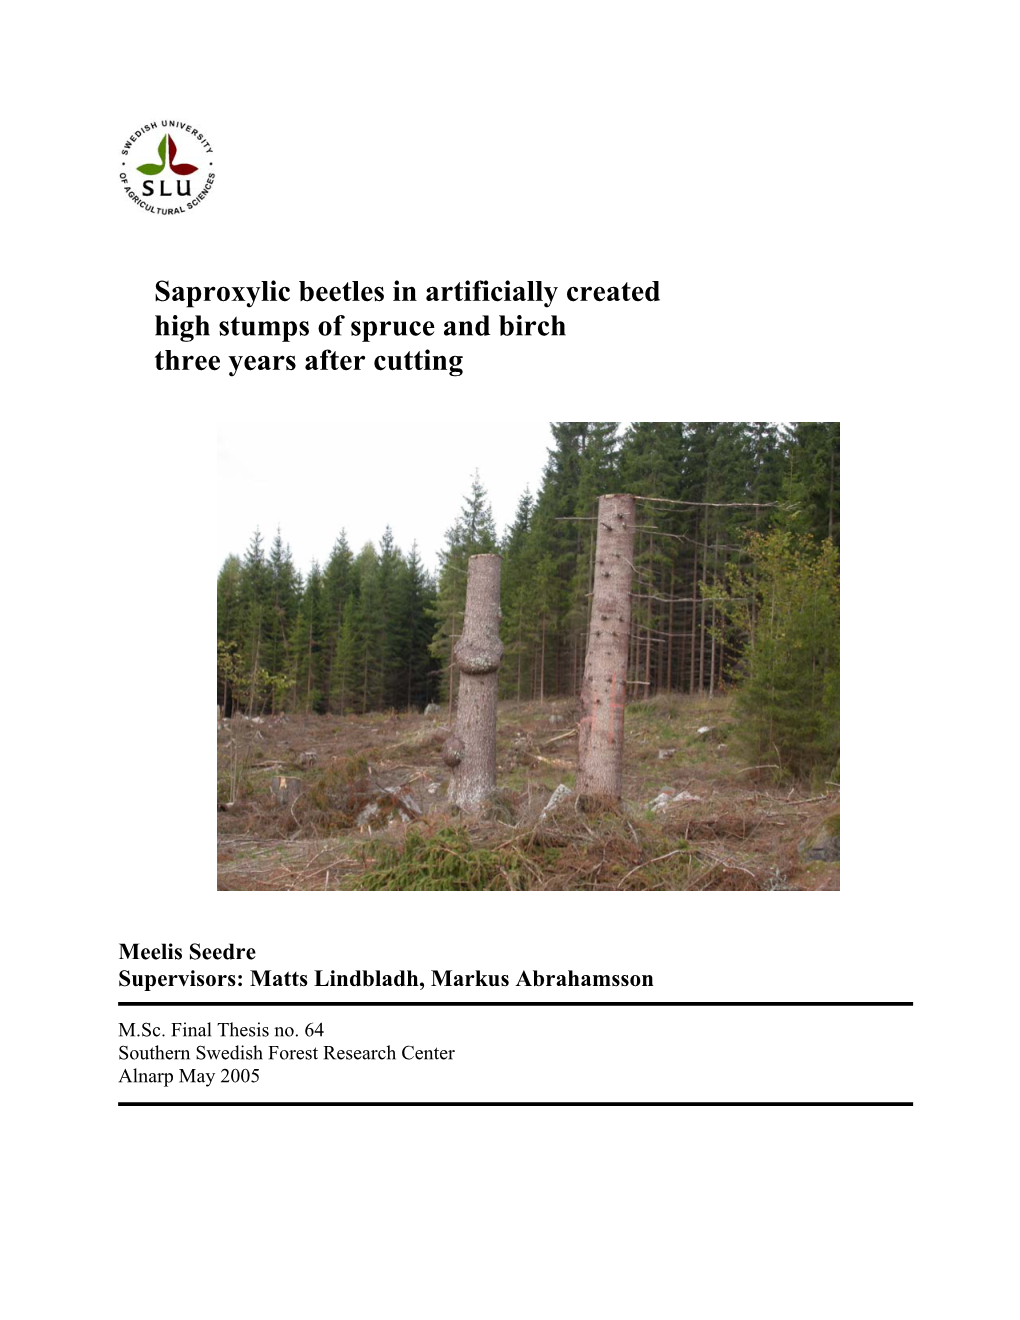 Saproxylic Beetles in Artificially Created High Stumps of Spruce and Birch Three Years After Cutting